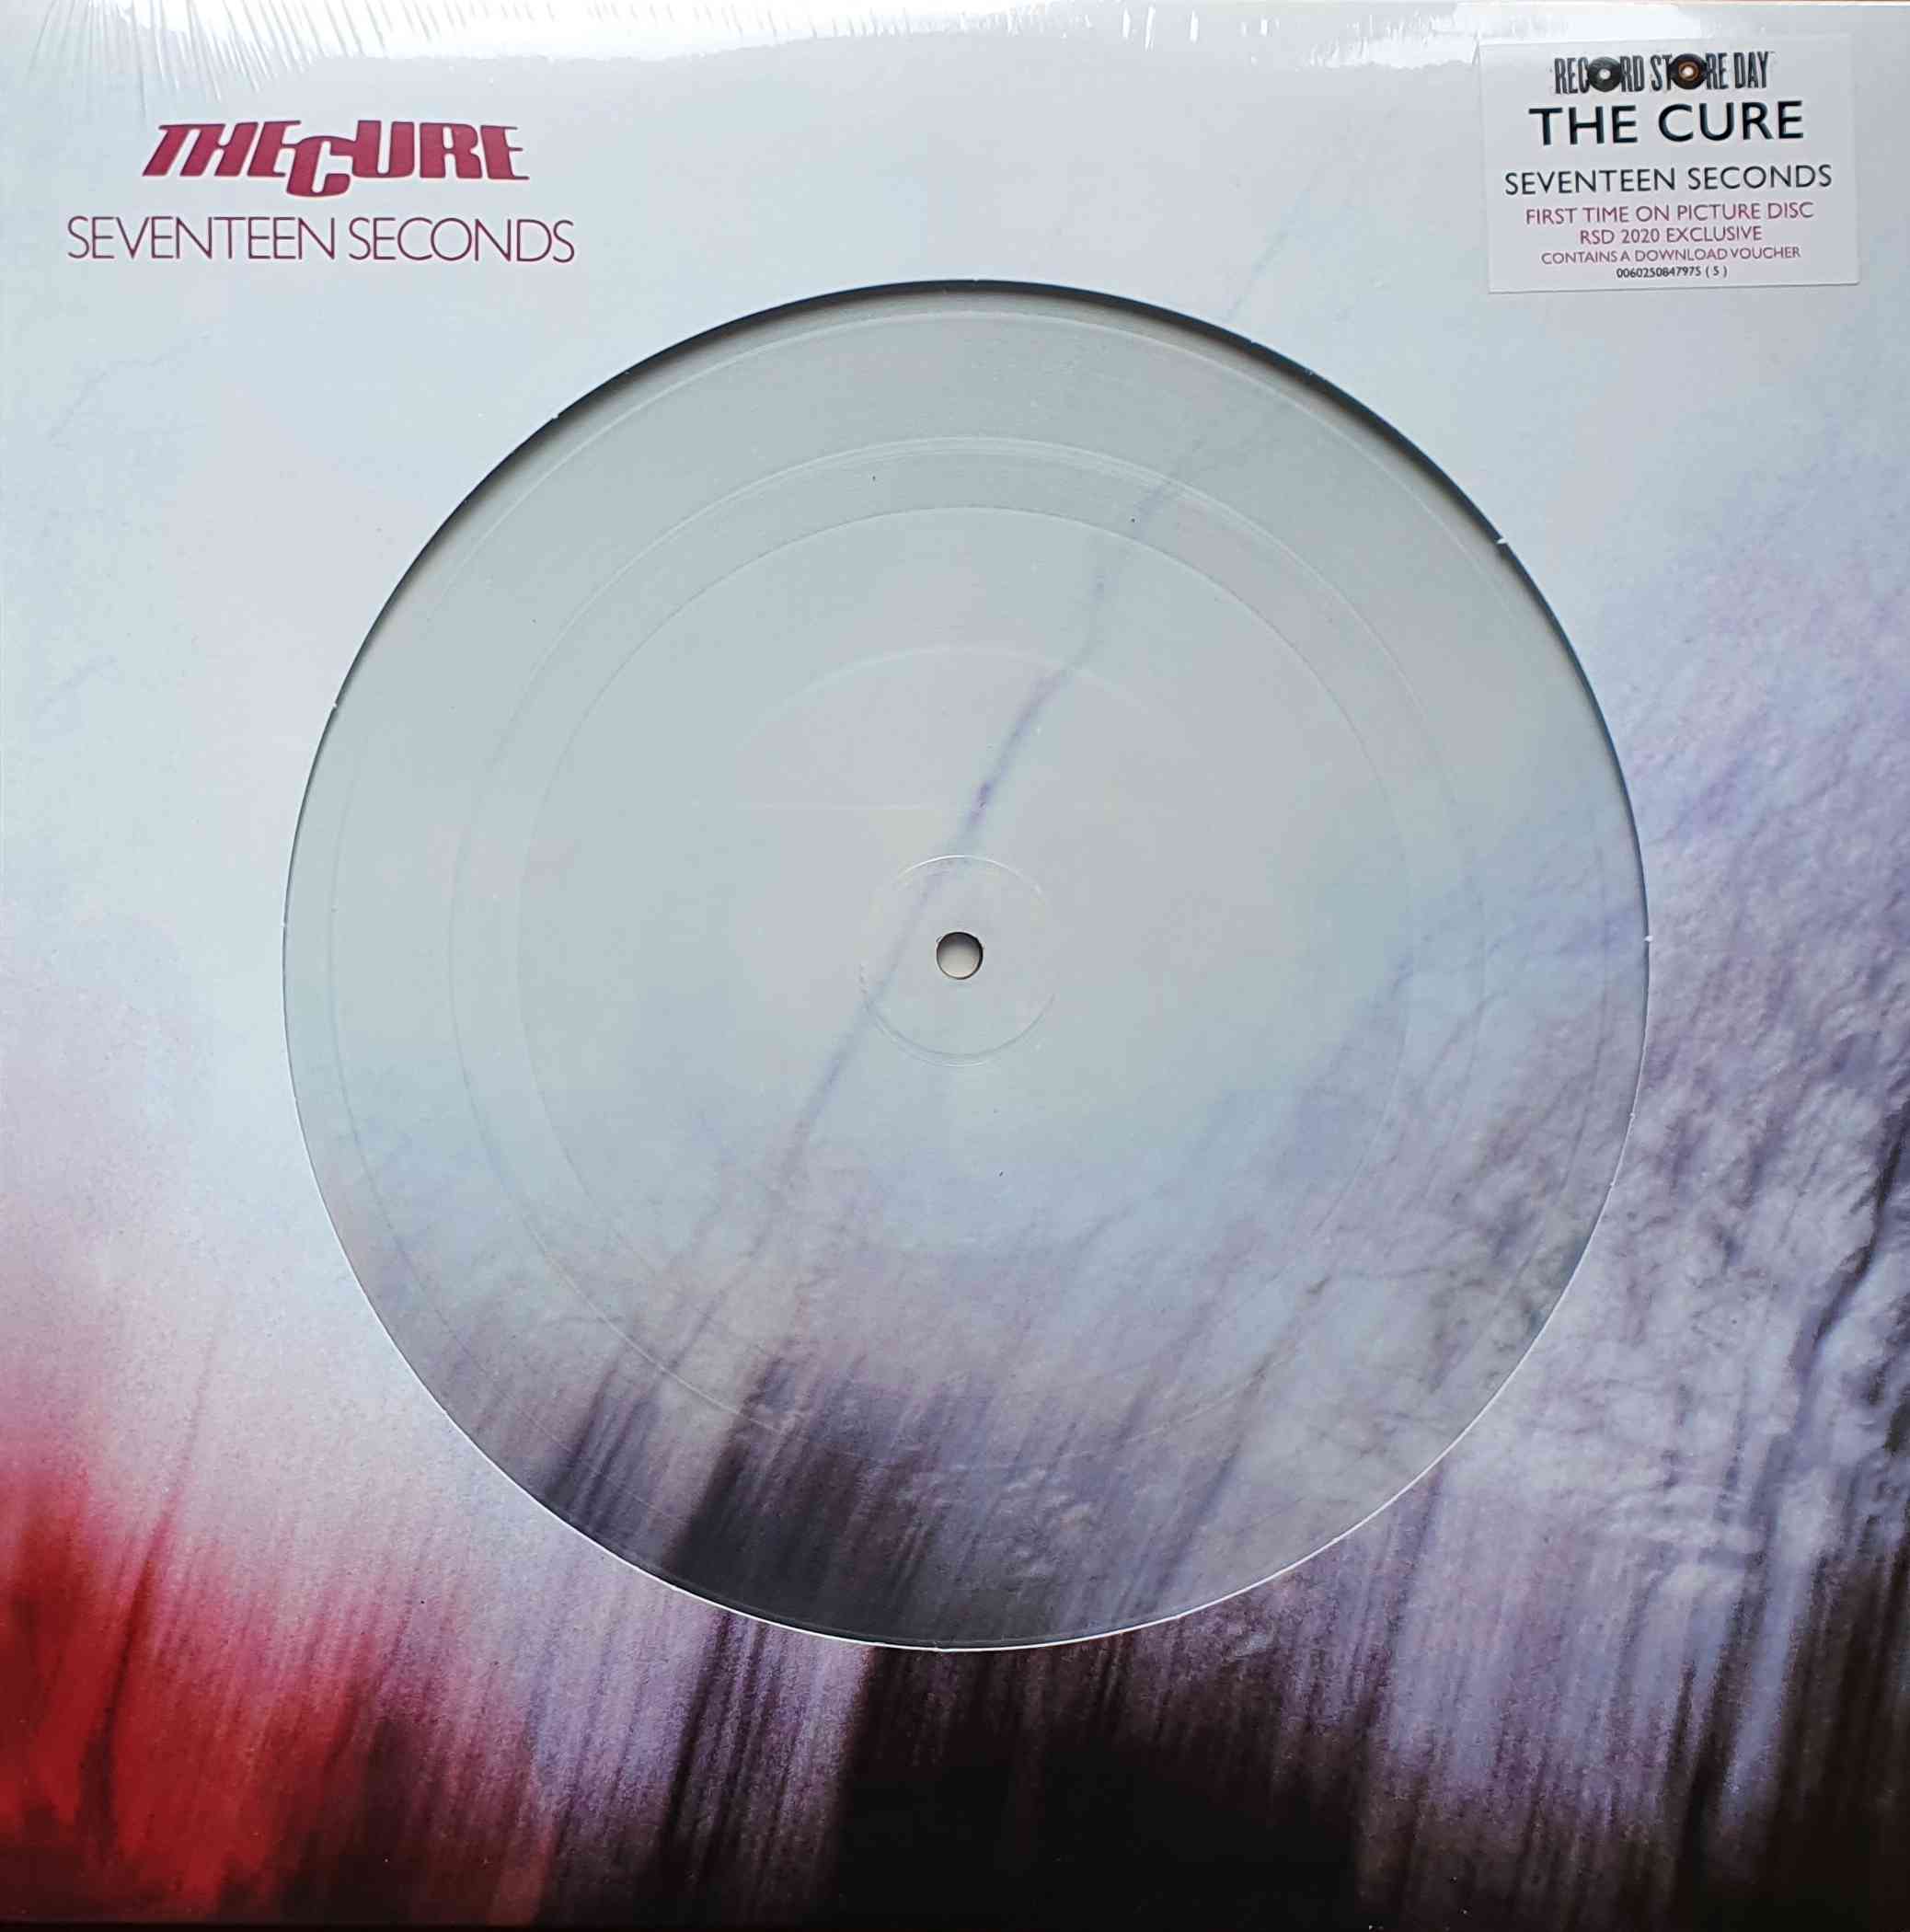 Picture of 00602508479755 Seventeen seconds - Limited edition picture discs - Record Store Day 2020 by artist The Cure